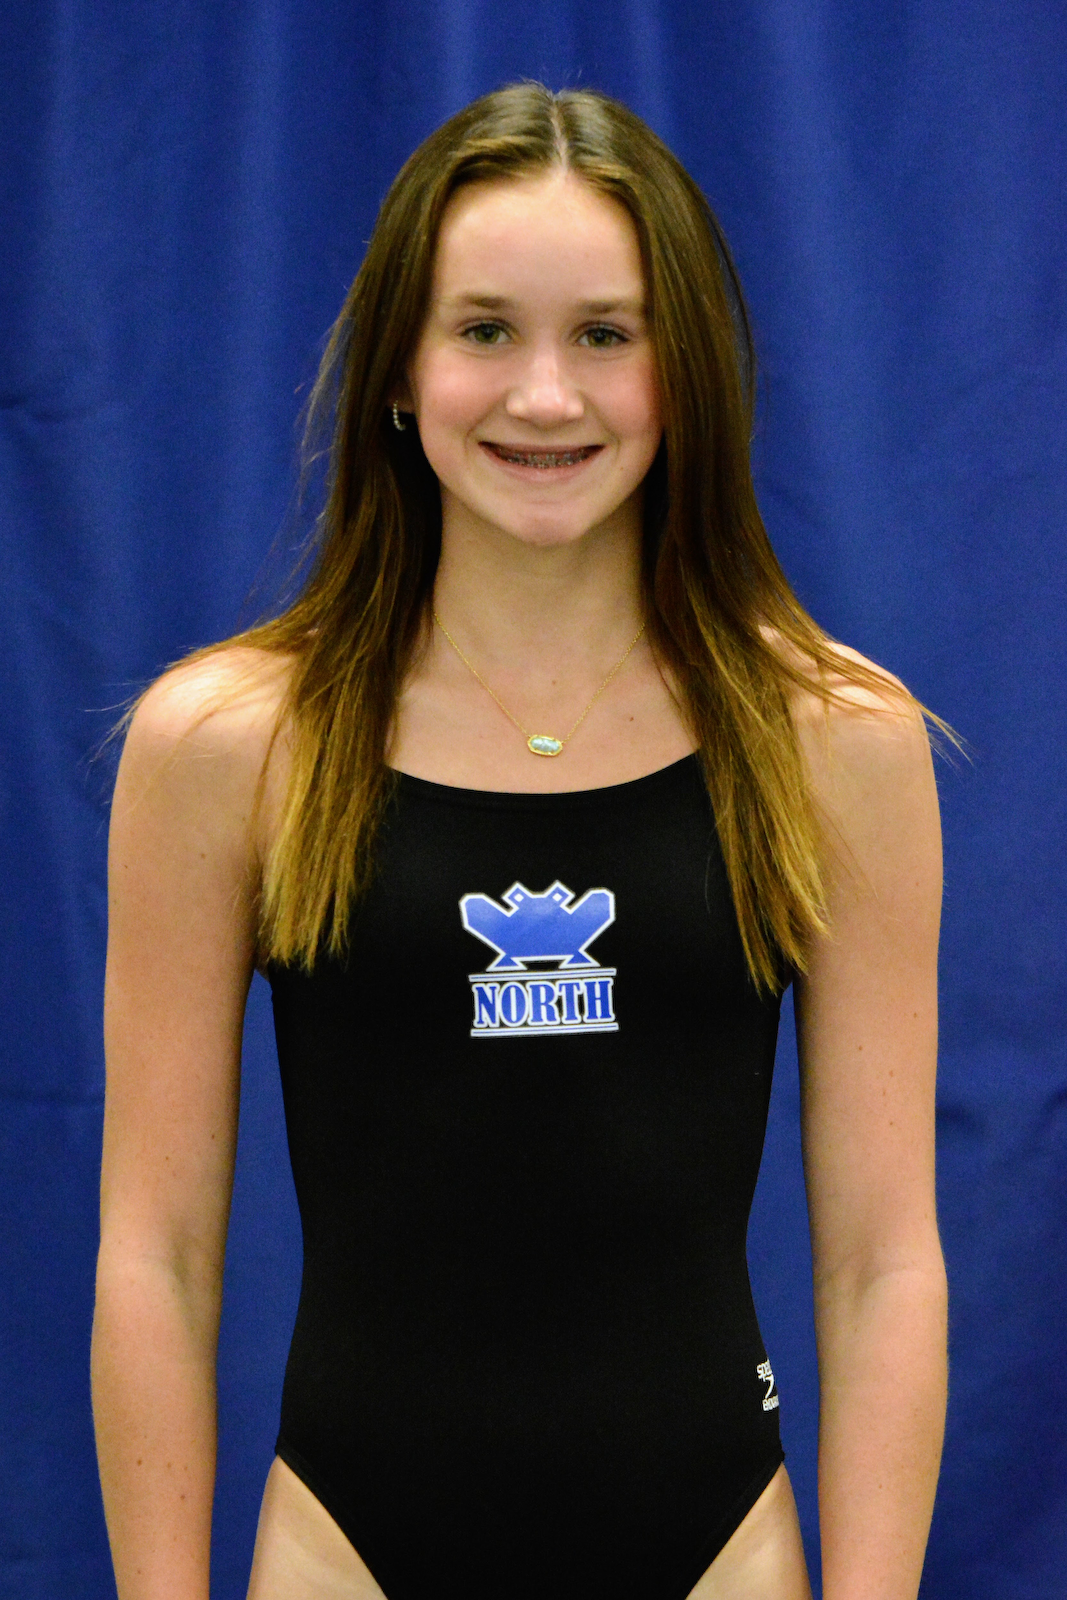 Columbus North swimmers fall to Center Grove cover photo